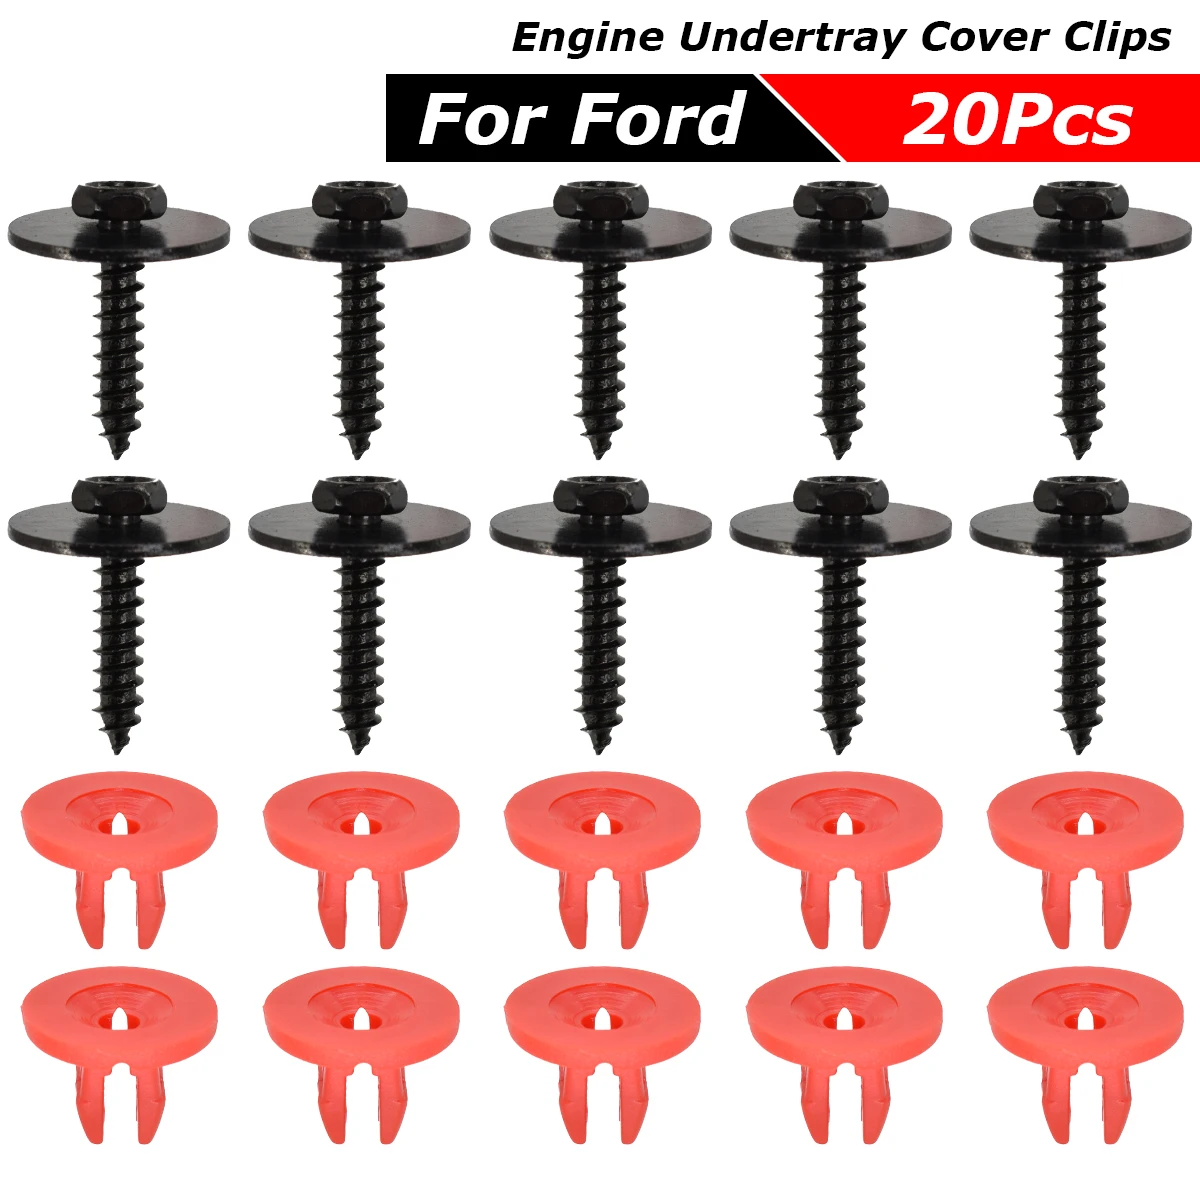 20pcs Car Engine Undertray Cover Clips Screws Bottom Cover Shield Guard for Ford - £13.34 GBP